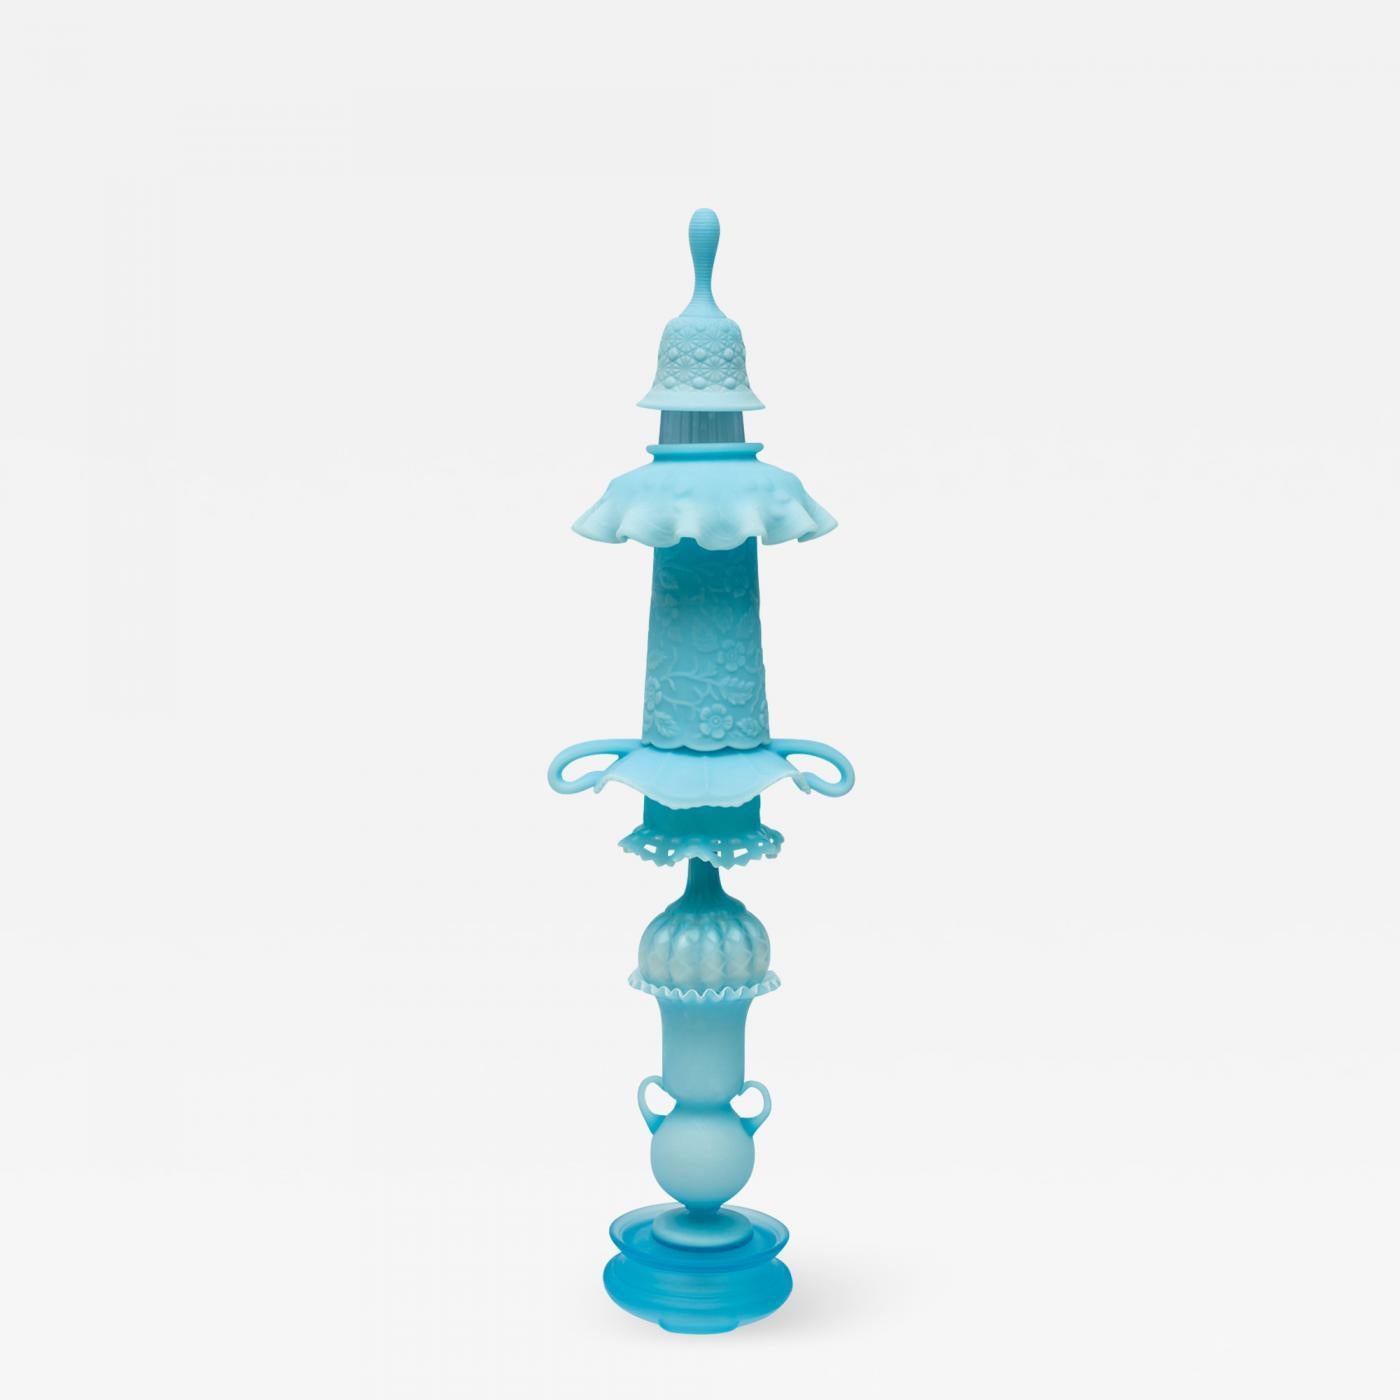 Blue Sating Glass Stalagmite no.001  - Sculpture by Alexis Zambrano